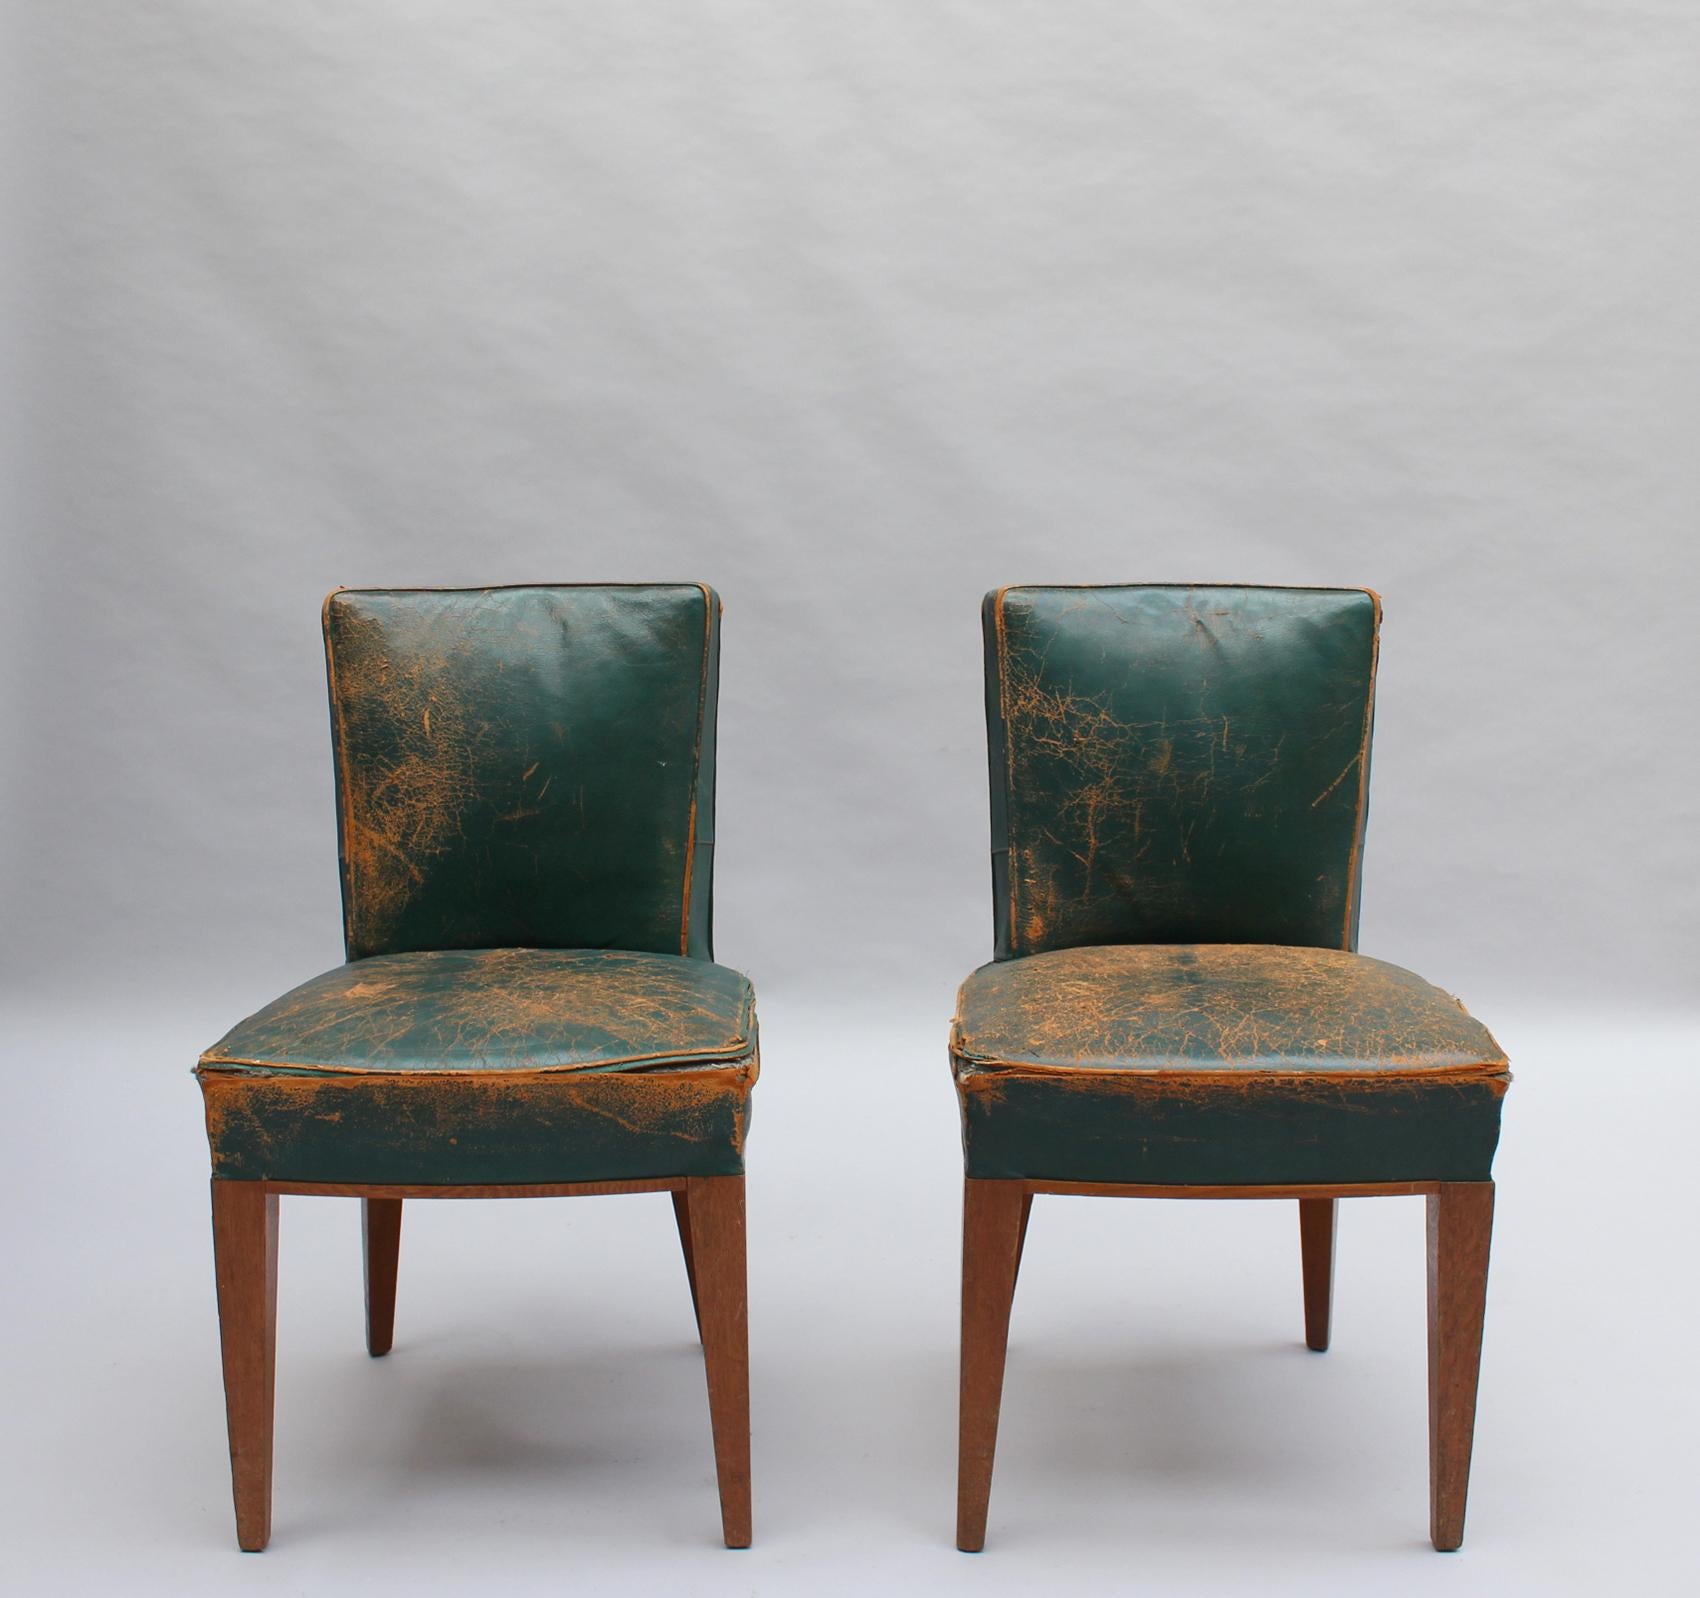 Two fine French Art Deco side chairs in solid oak.